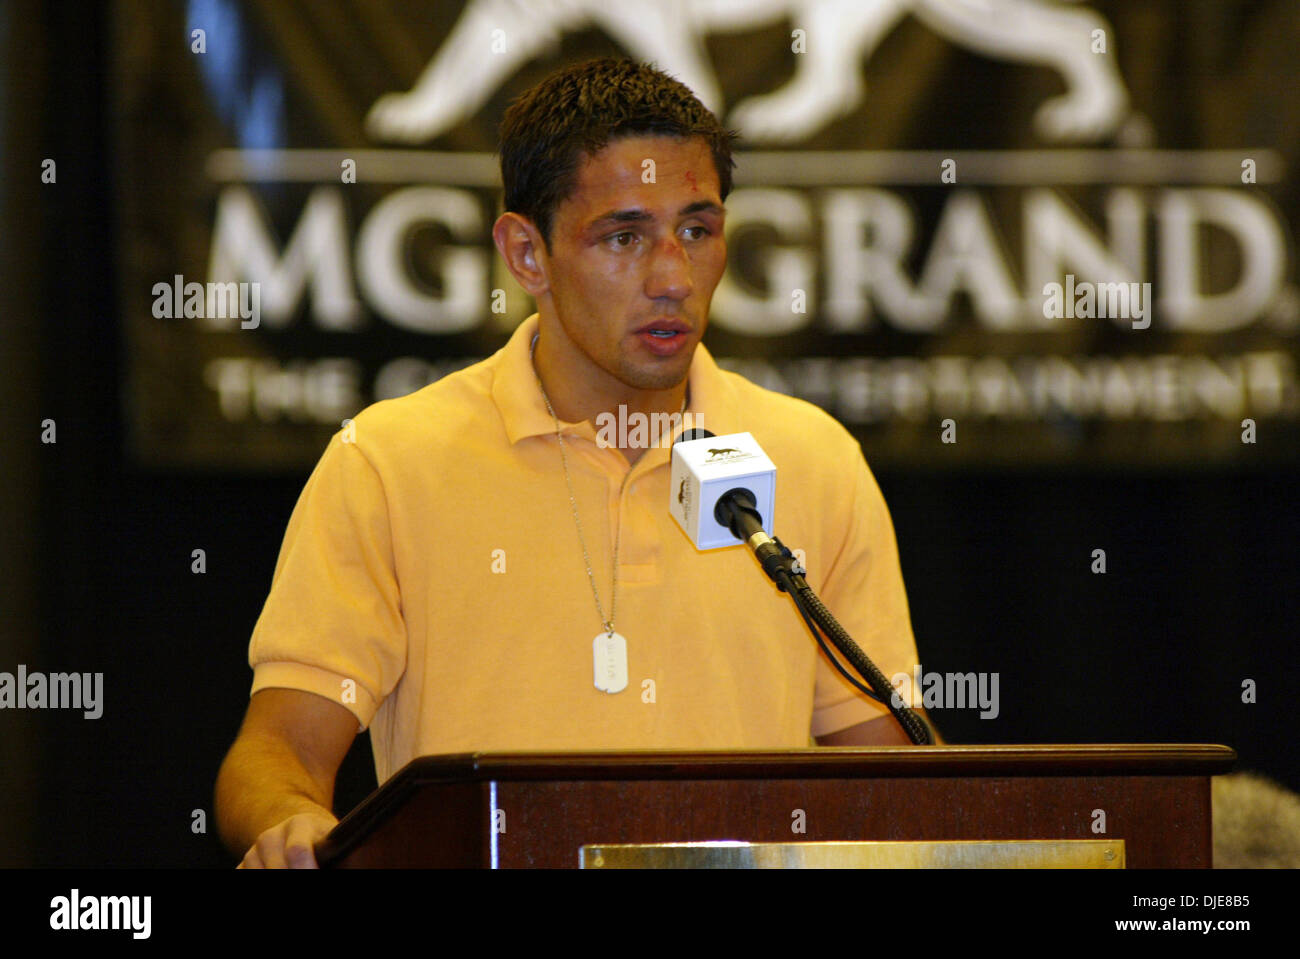 Jun 04, 2004; Las Vegas, NV, USA; FELIX STURM talks at the post fight press conference at the MGM hotel and casino. Sturm nearly upset De La Hoya's planned megafight with Bernard Hopkins, giving De La Hoya all he could handle for 12 rounds Saturday night before coming out on the losing end of a narrow but unanimous decision. De La Hoya had to fight furiously in the last two rounds  Stock Photo